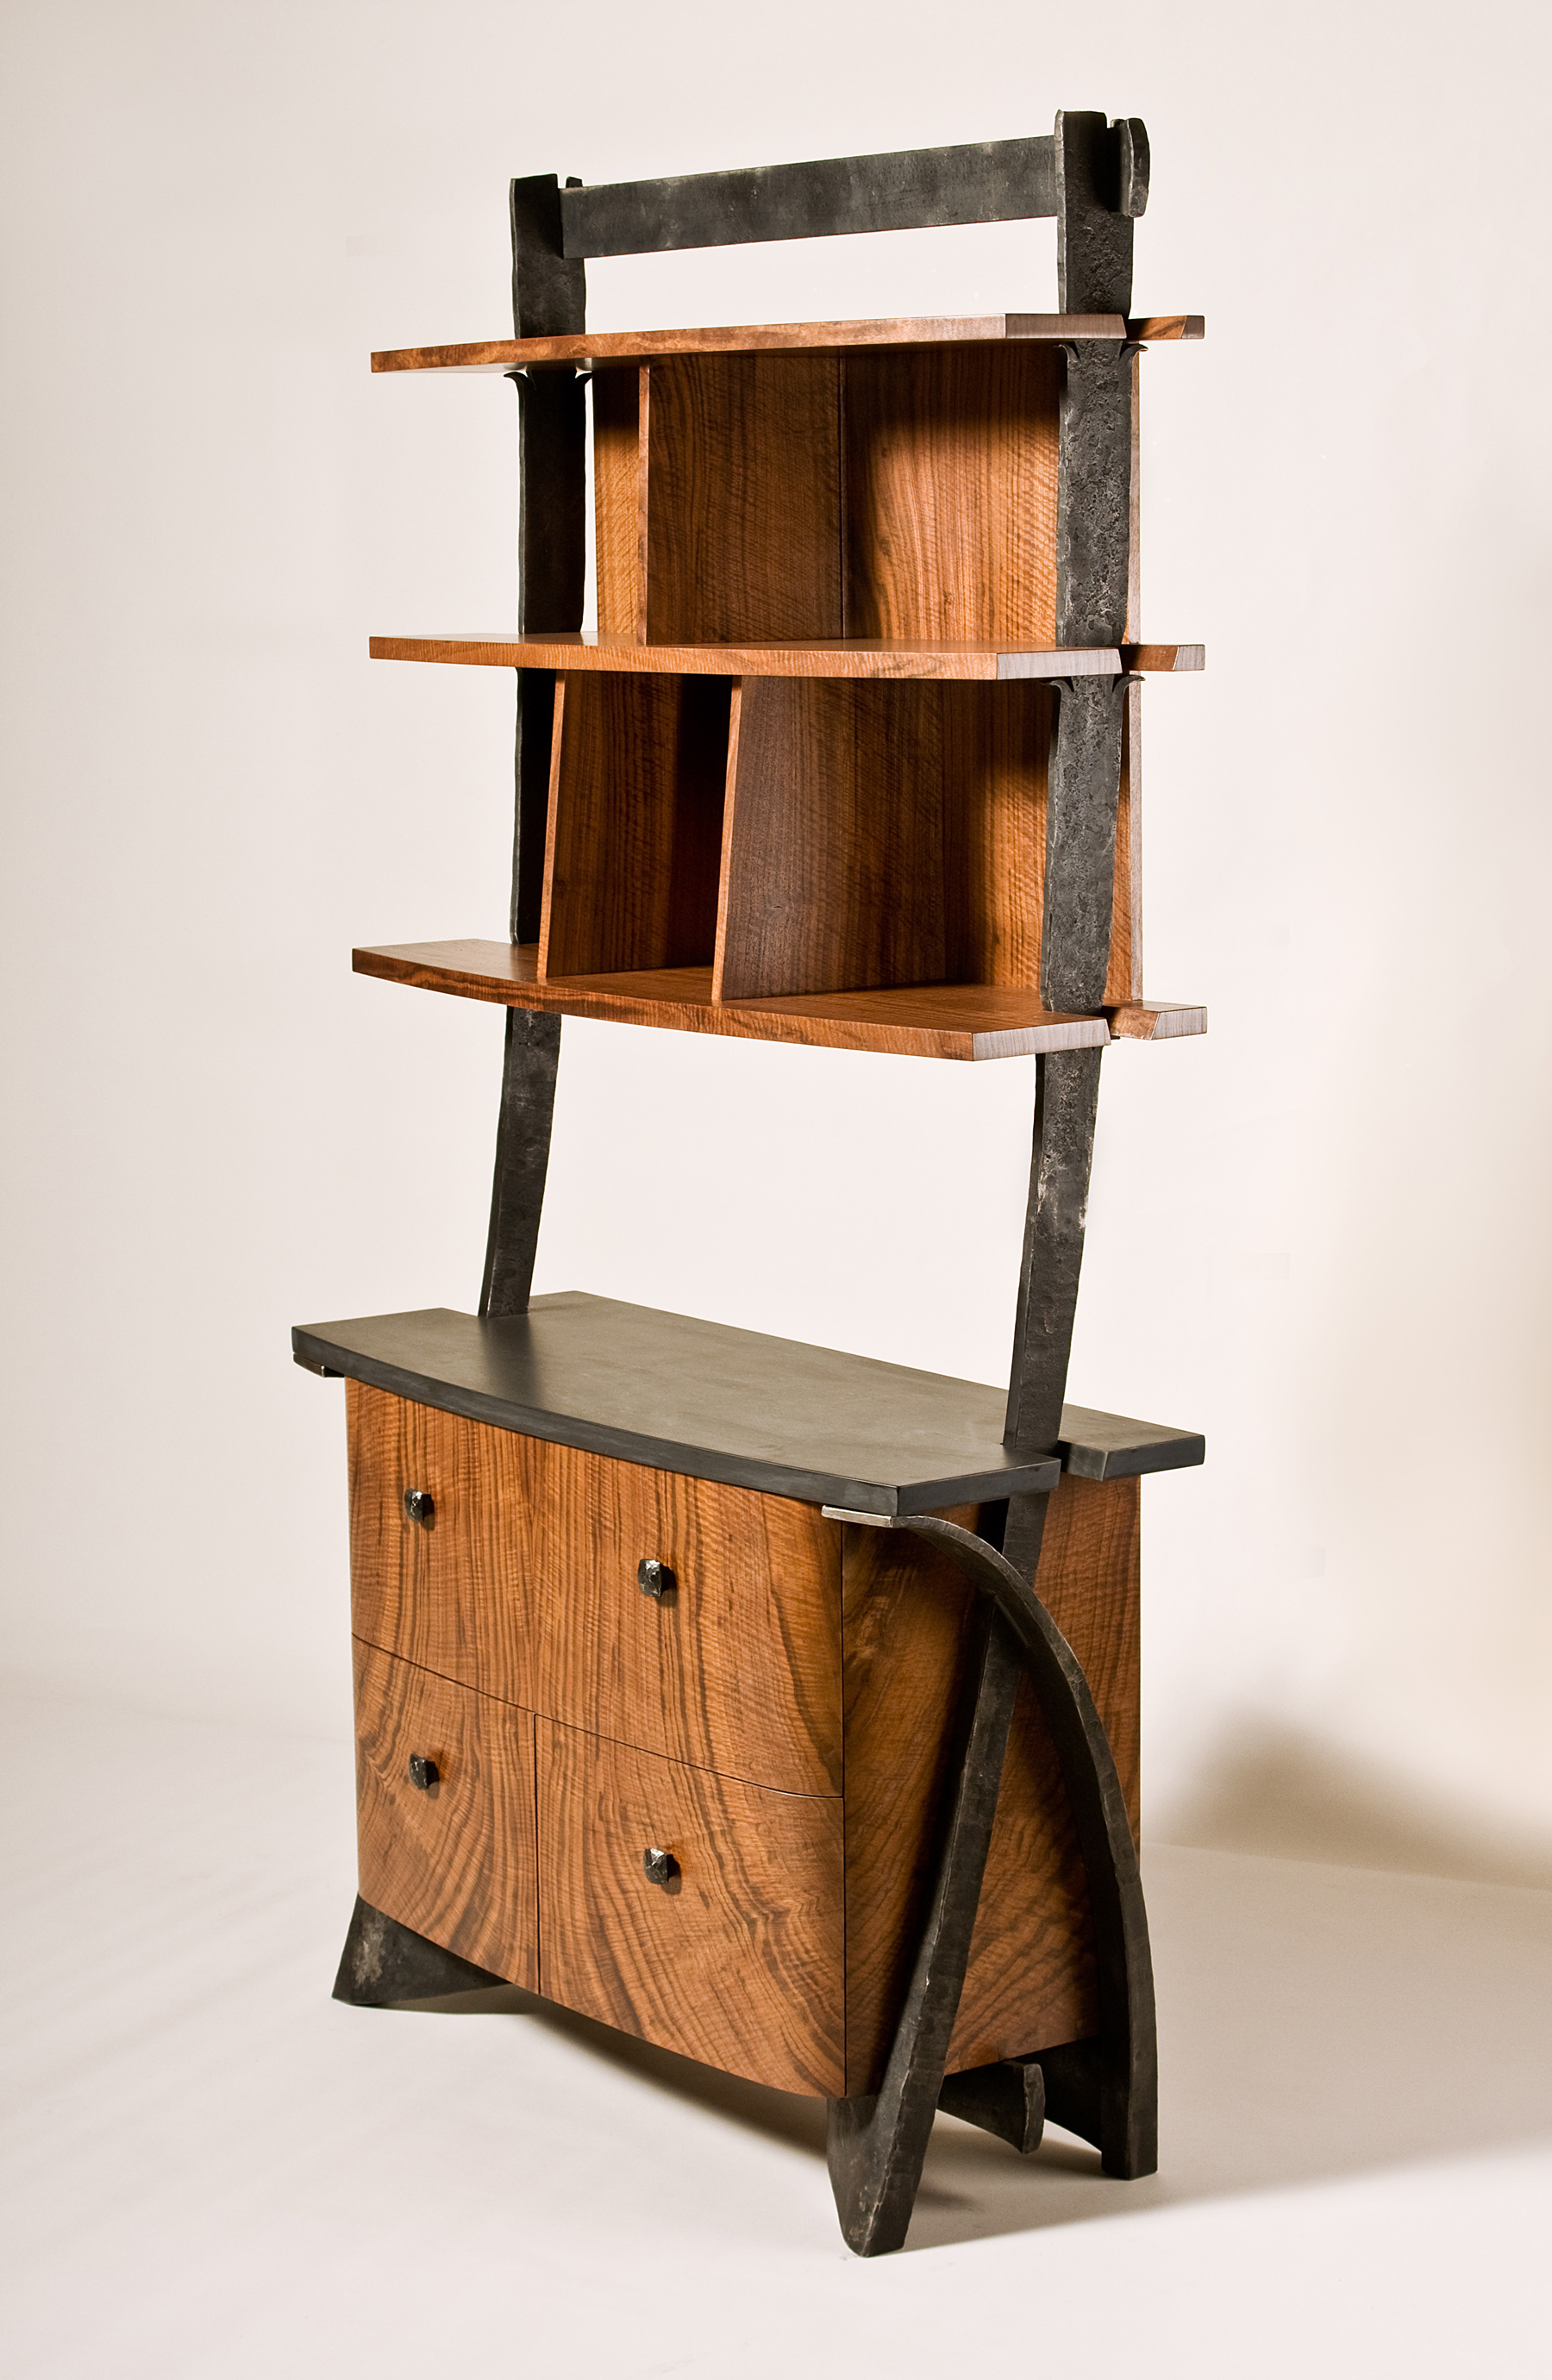 Functional art for the home such as refined handcrafted furniture design by Rob Hare will be on display and available for purchase at the Western Design Conference this September in Jackson Hole.